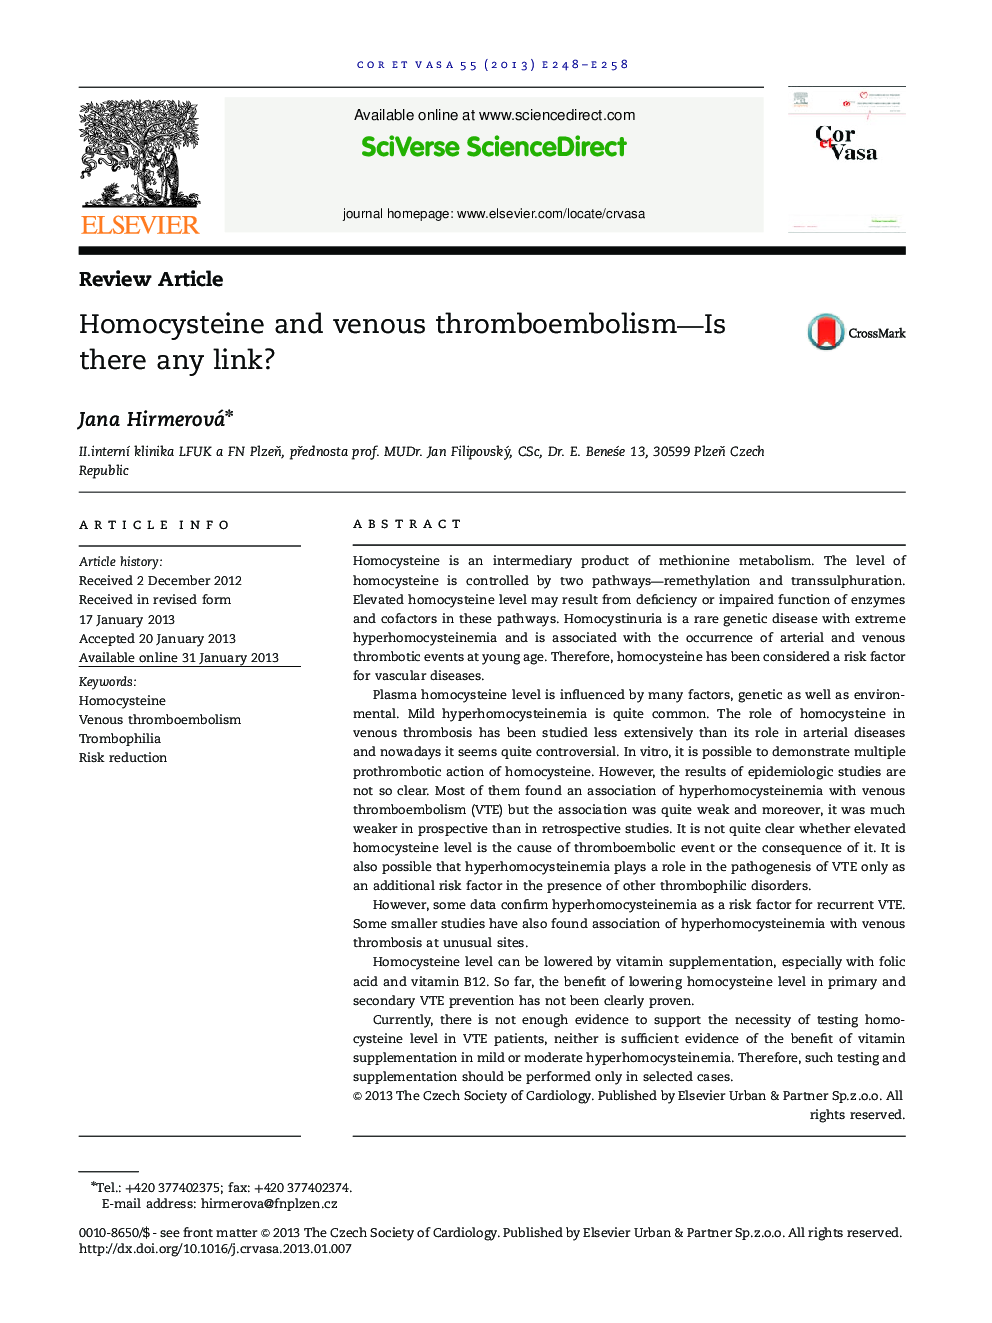 Review ArticleHomocysteine and venous thromboembolism-Is there any link?